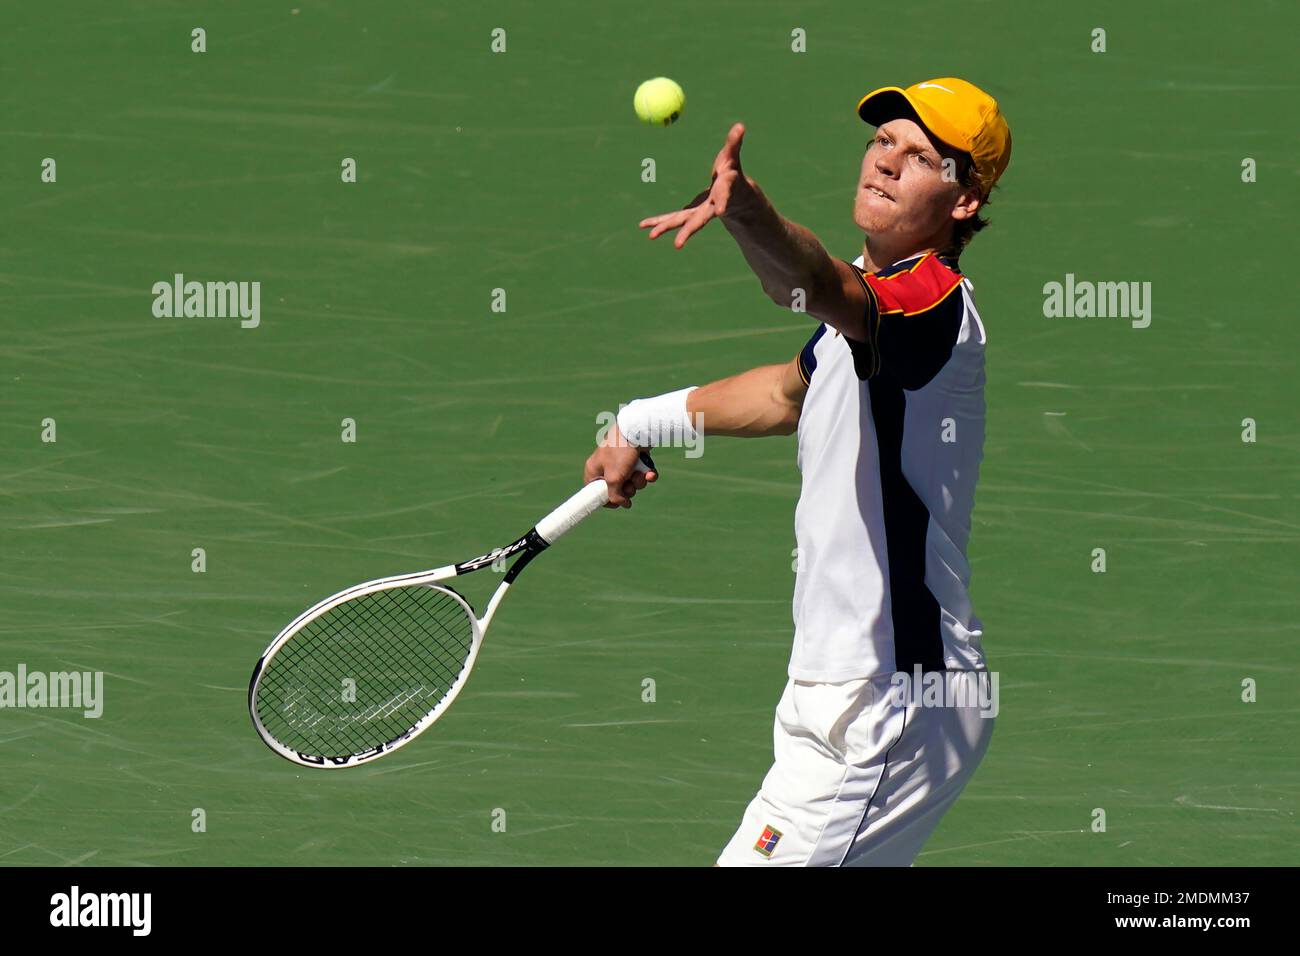 Jannik Sinner, of Italy, serves to Alexander Zverev, of Germany, during the fourth round of the US Open tennis championships, Monday, Sept